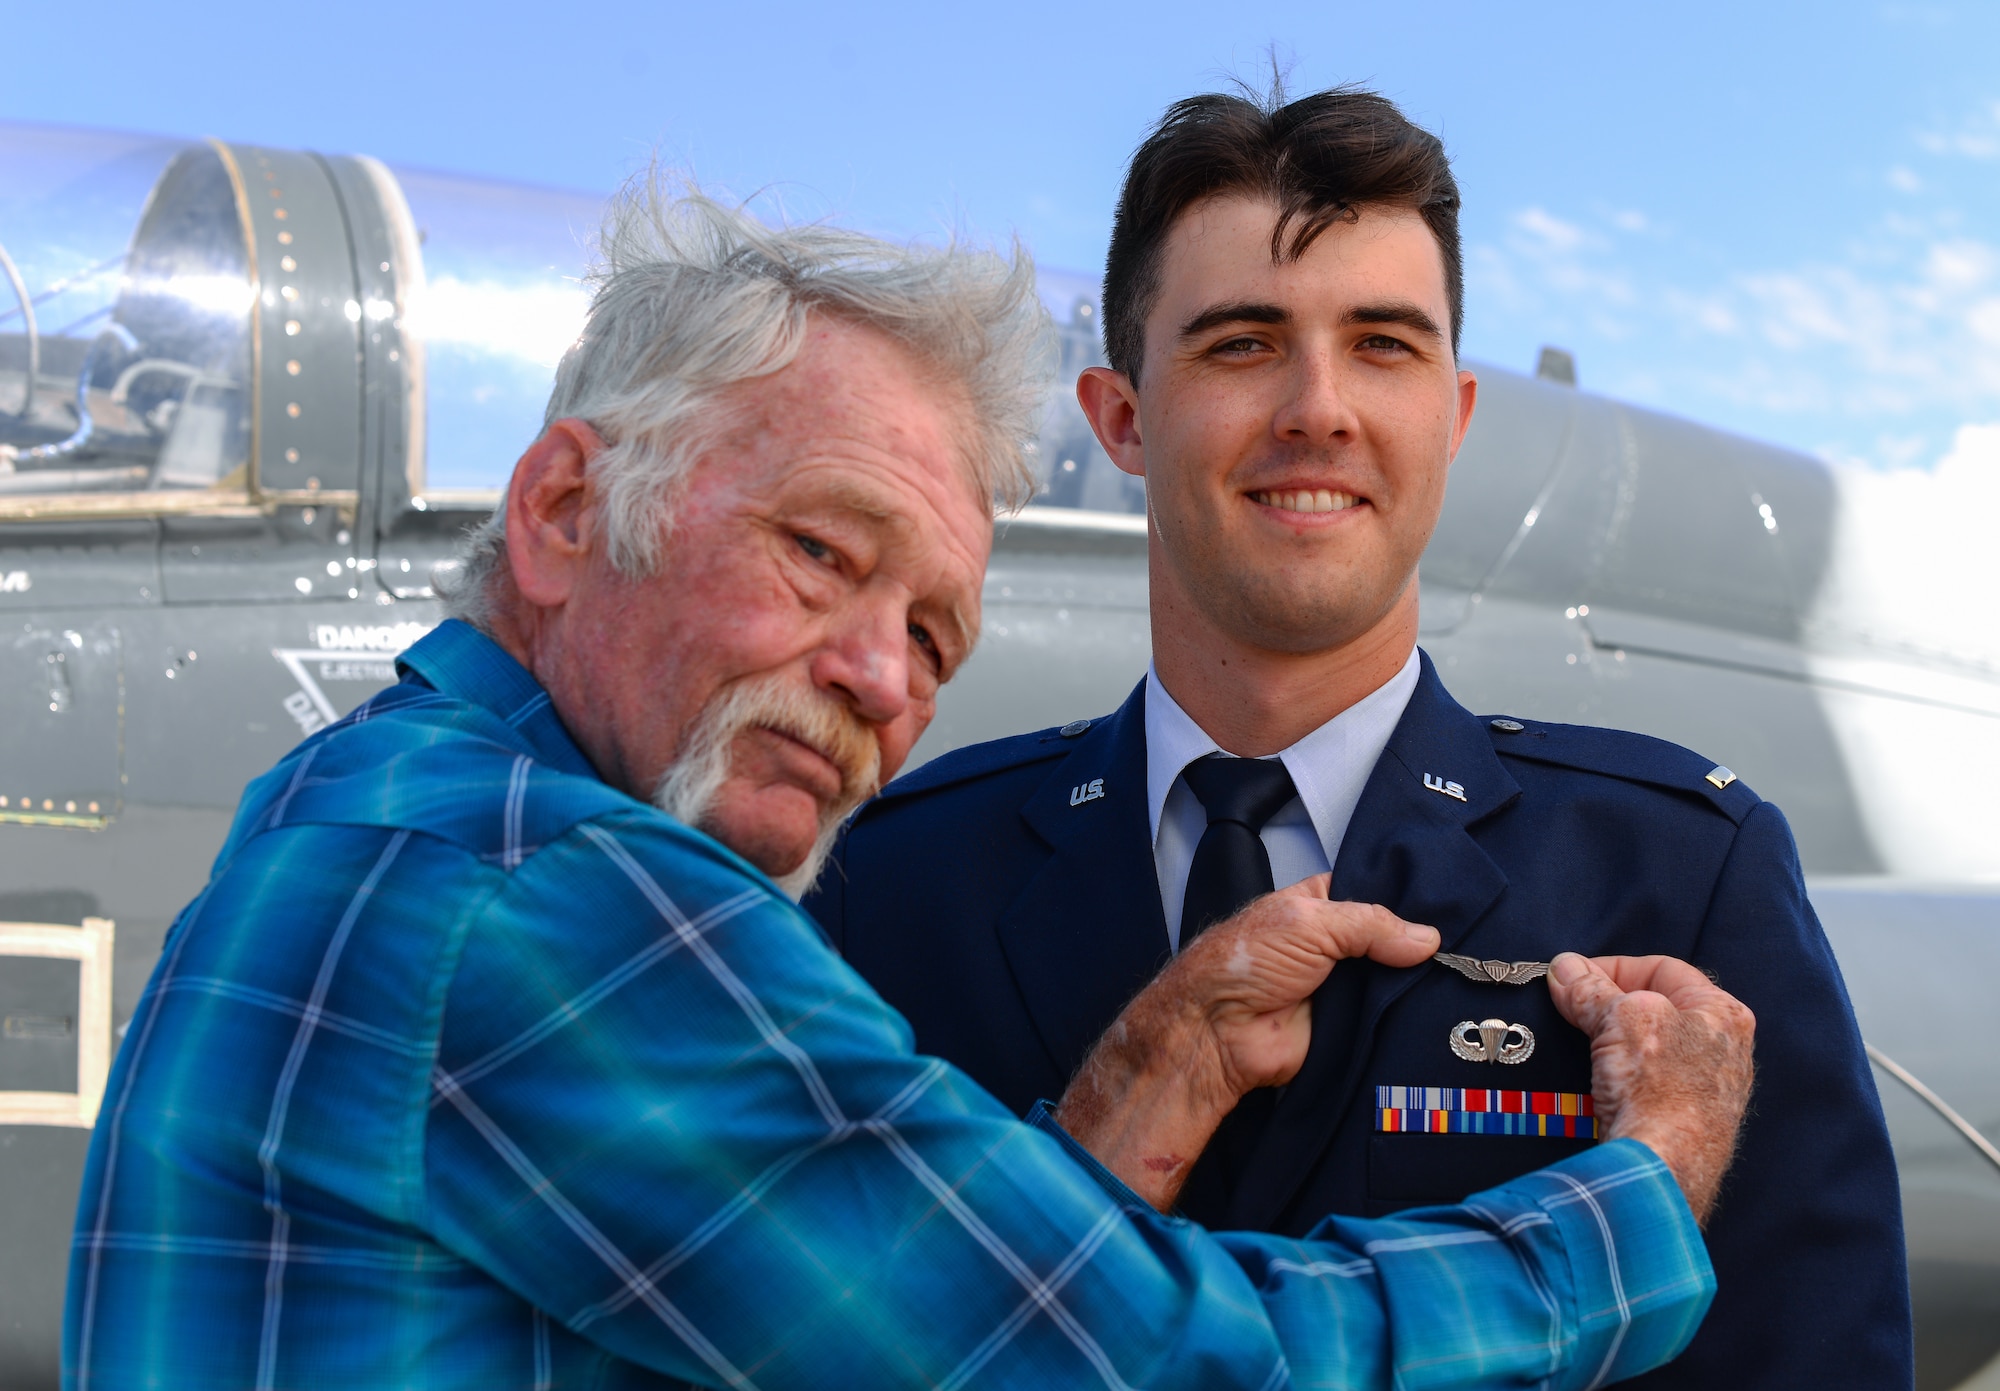 Lt. Col. (ret.) Thomas Byrd, former pilot, pins a pair of heritage wings to the chest of 2nd Lt. Colin Asbury at Laughlin Air Force Base, Texas, May 18, 2018. Byrd, credited with more than 3,000 hours flying the F-4 Phantom and more than 1,000 hours in the F-16 Fighting Falcon, passes his uncle’s wings to Asbury, who had dreamed about flying since he was a child. (U.S. Air Force photo by Senior Airman Benjamin N. Valmoja)